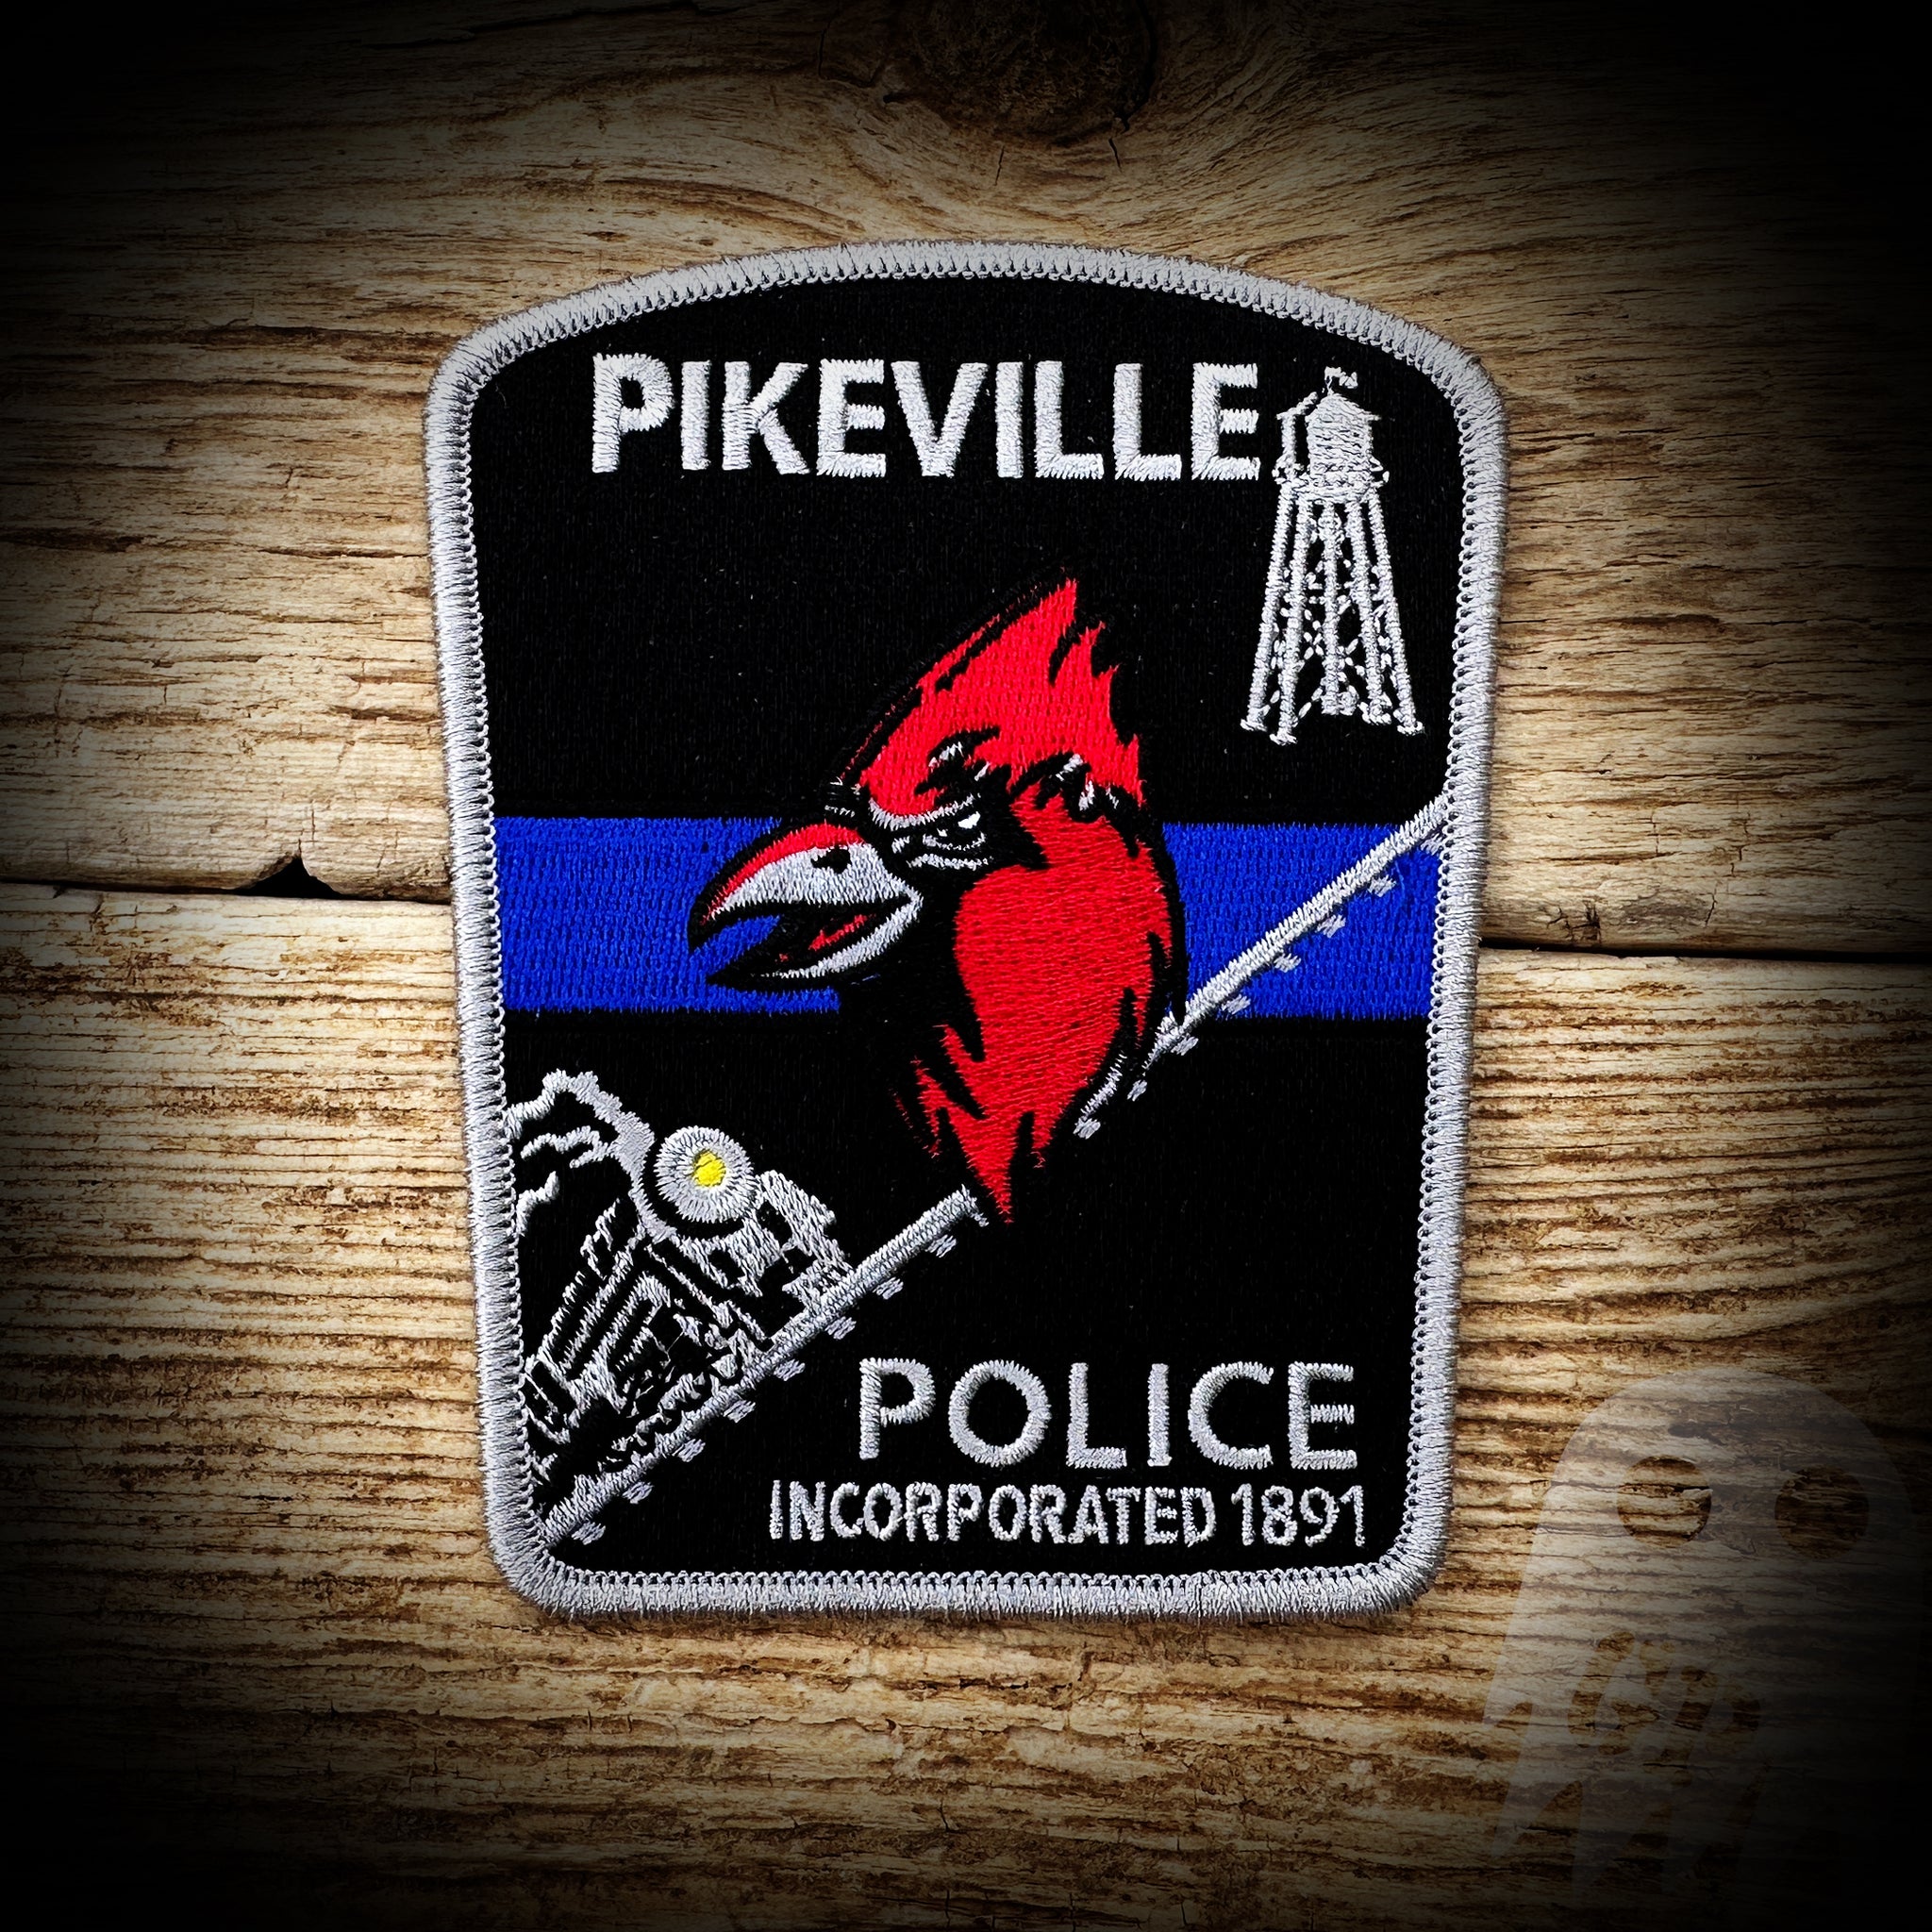 Pikeville, NC PD Standard Issue Patch - Authentic